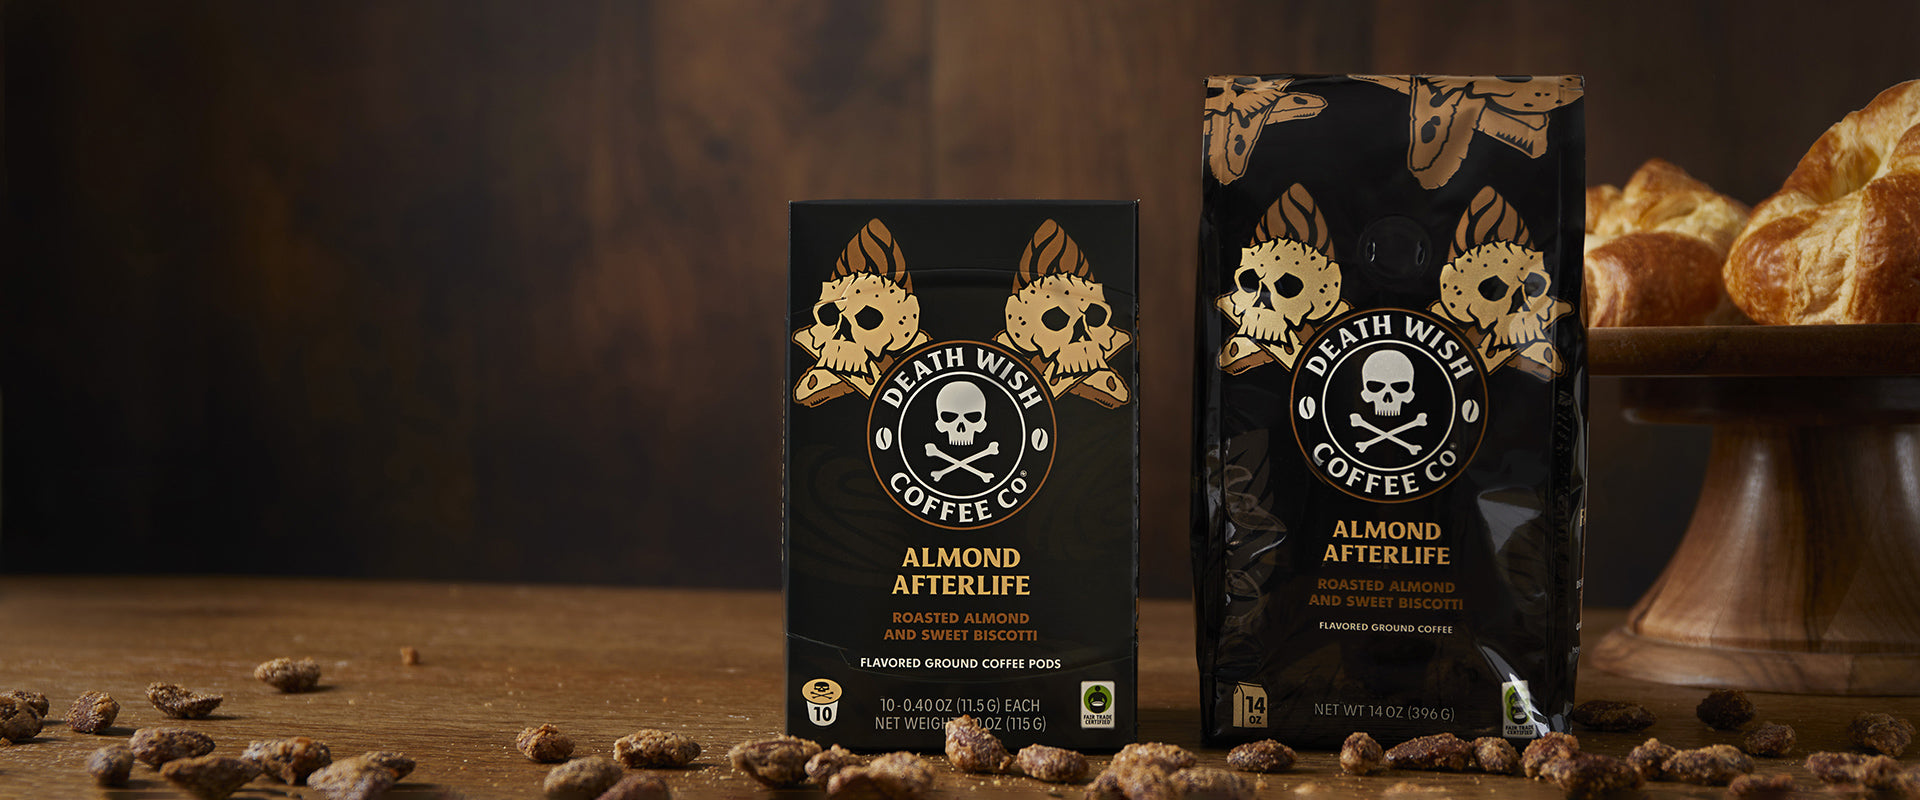 Try Death Wish Coffee Almond Biscotti Flavored Coffee - Almond Afterlife.